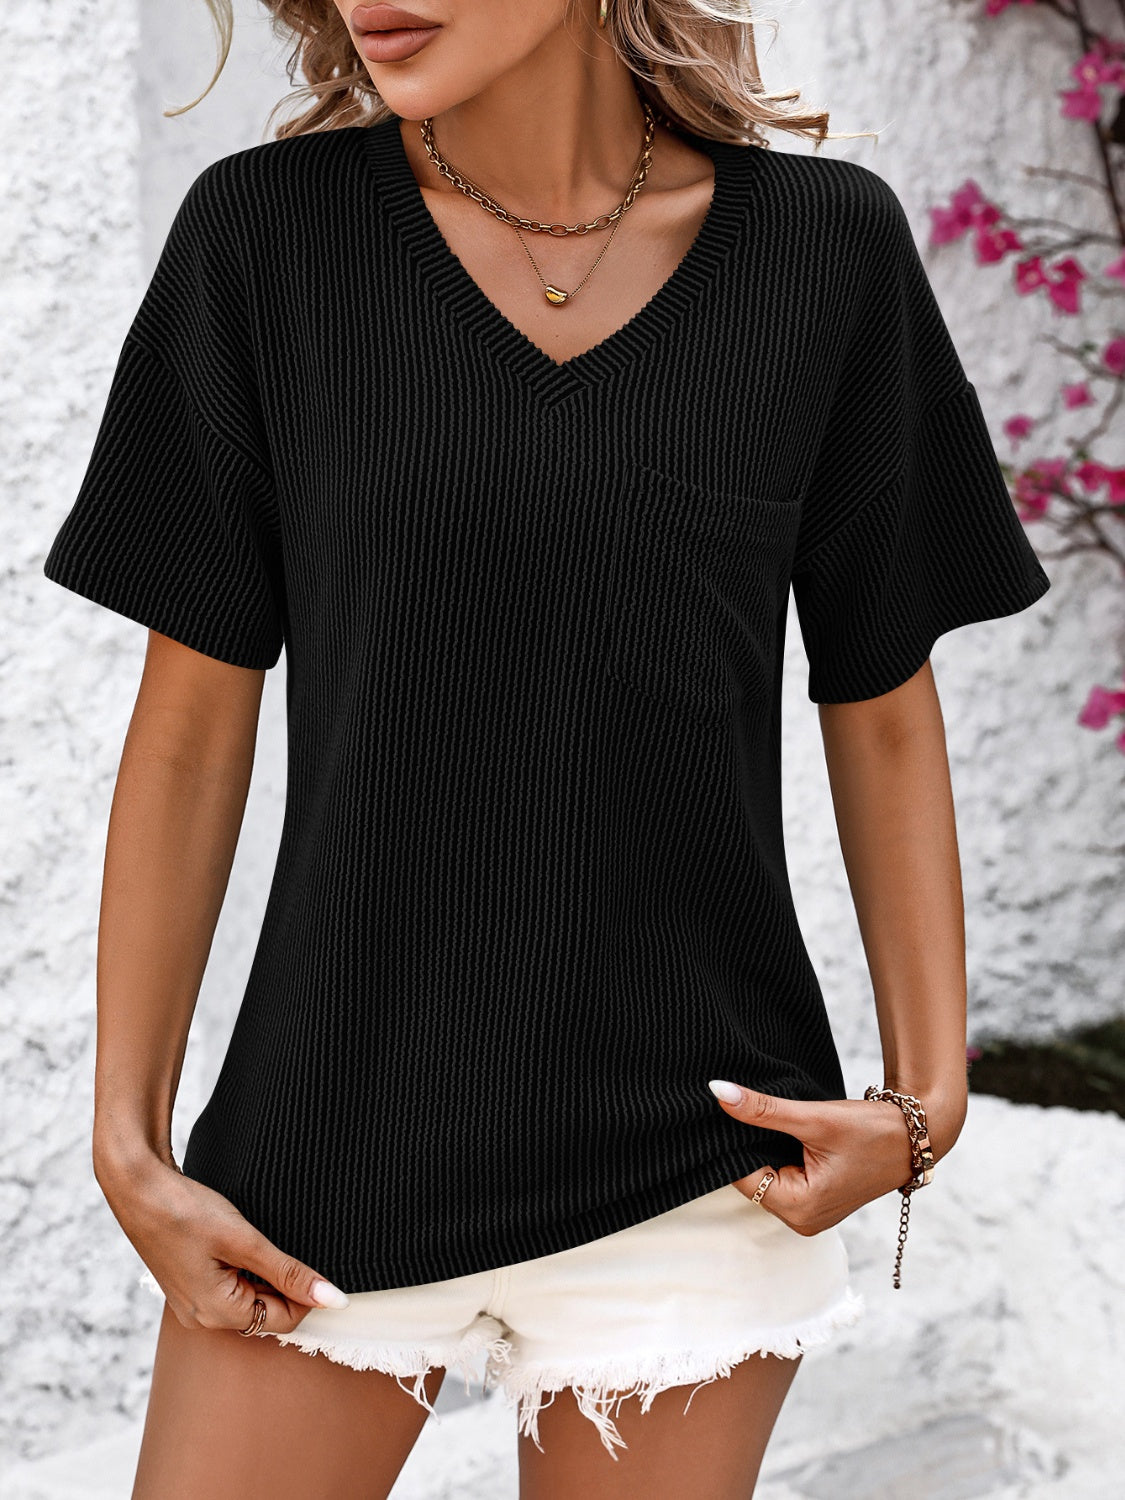 Women's Clothing, V-Neck Dropped Shoulder T-Shirt, Front View both hands in pockets Black, Rochelle's House